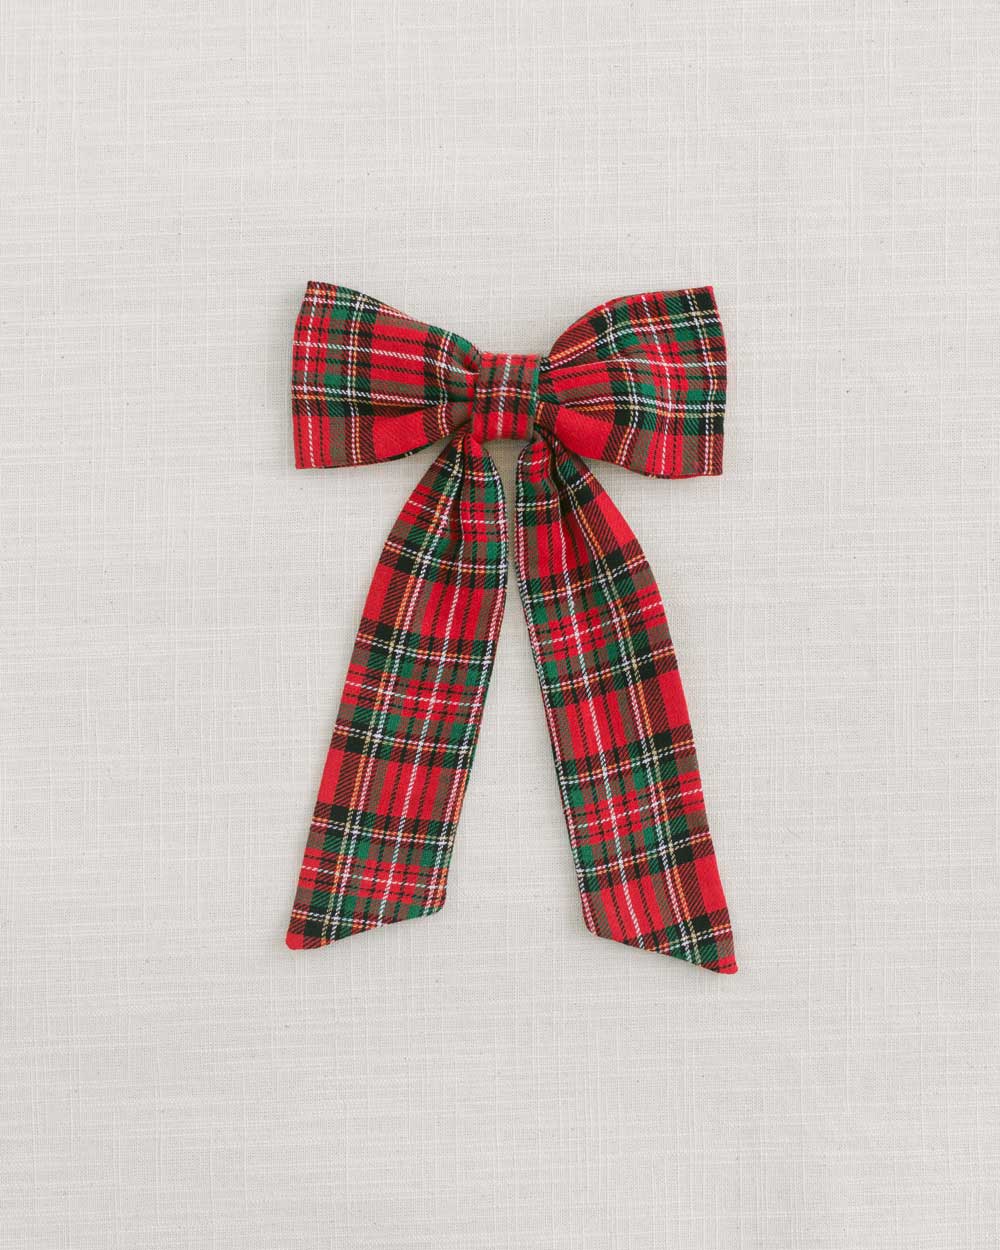 THE RED TARTAN CLASSIC BOW